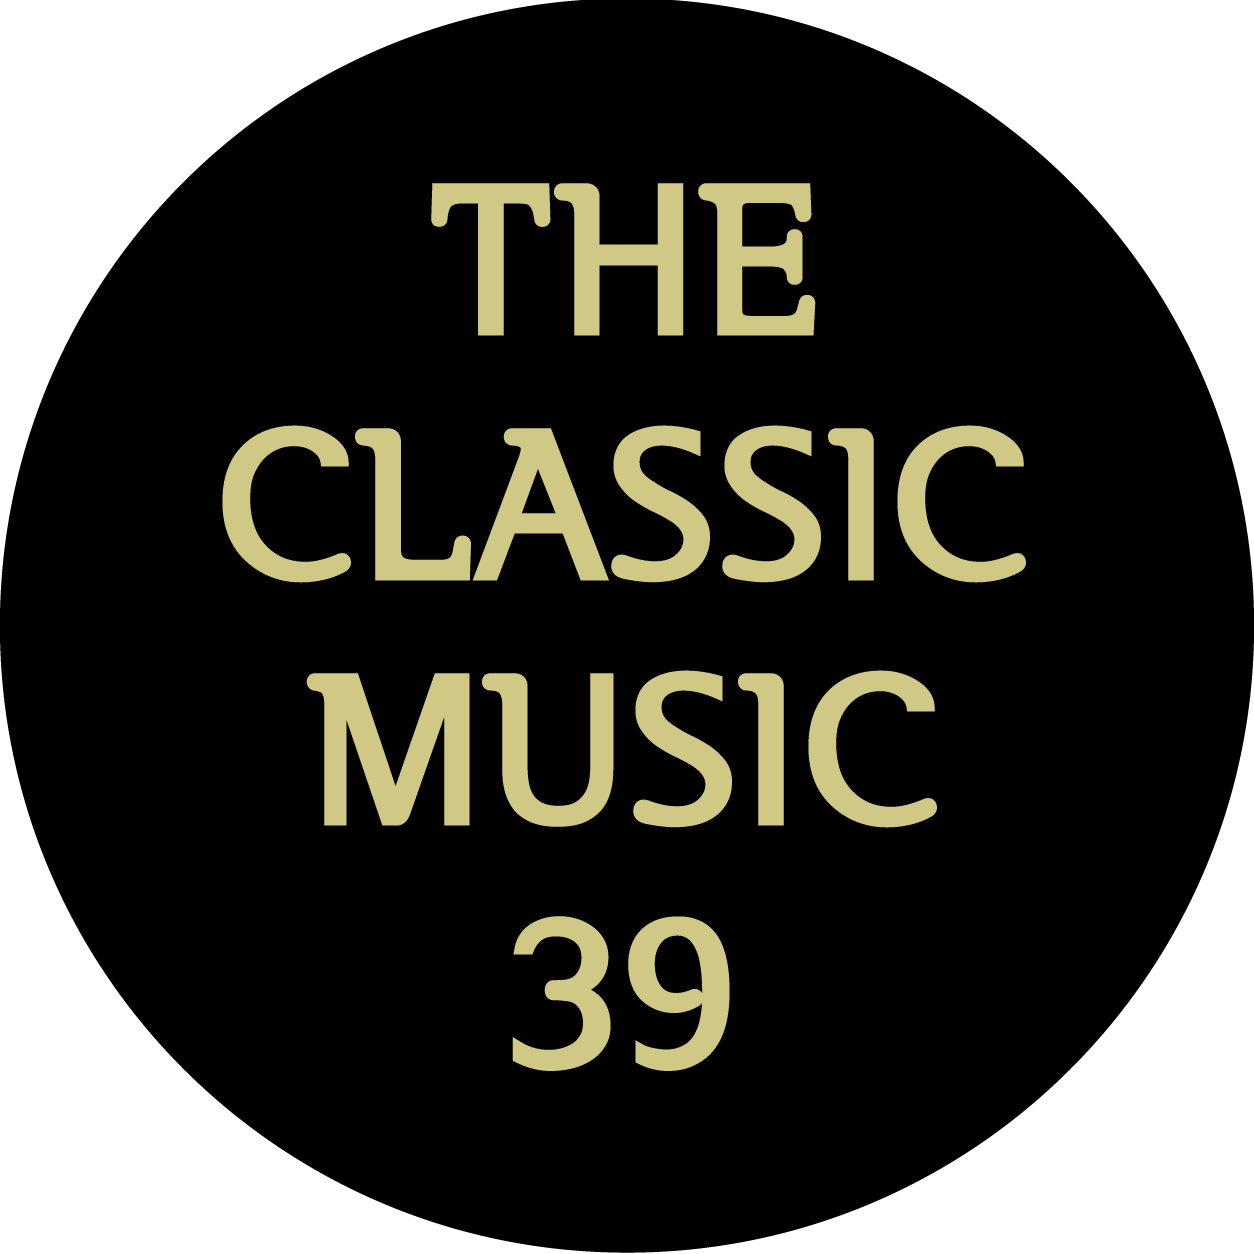 THE CLASSIC MUSIC ACADEMY